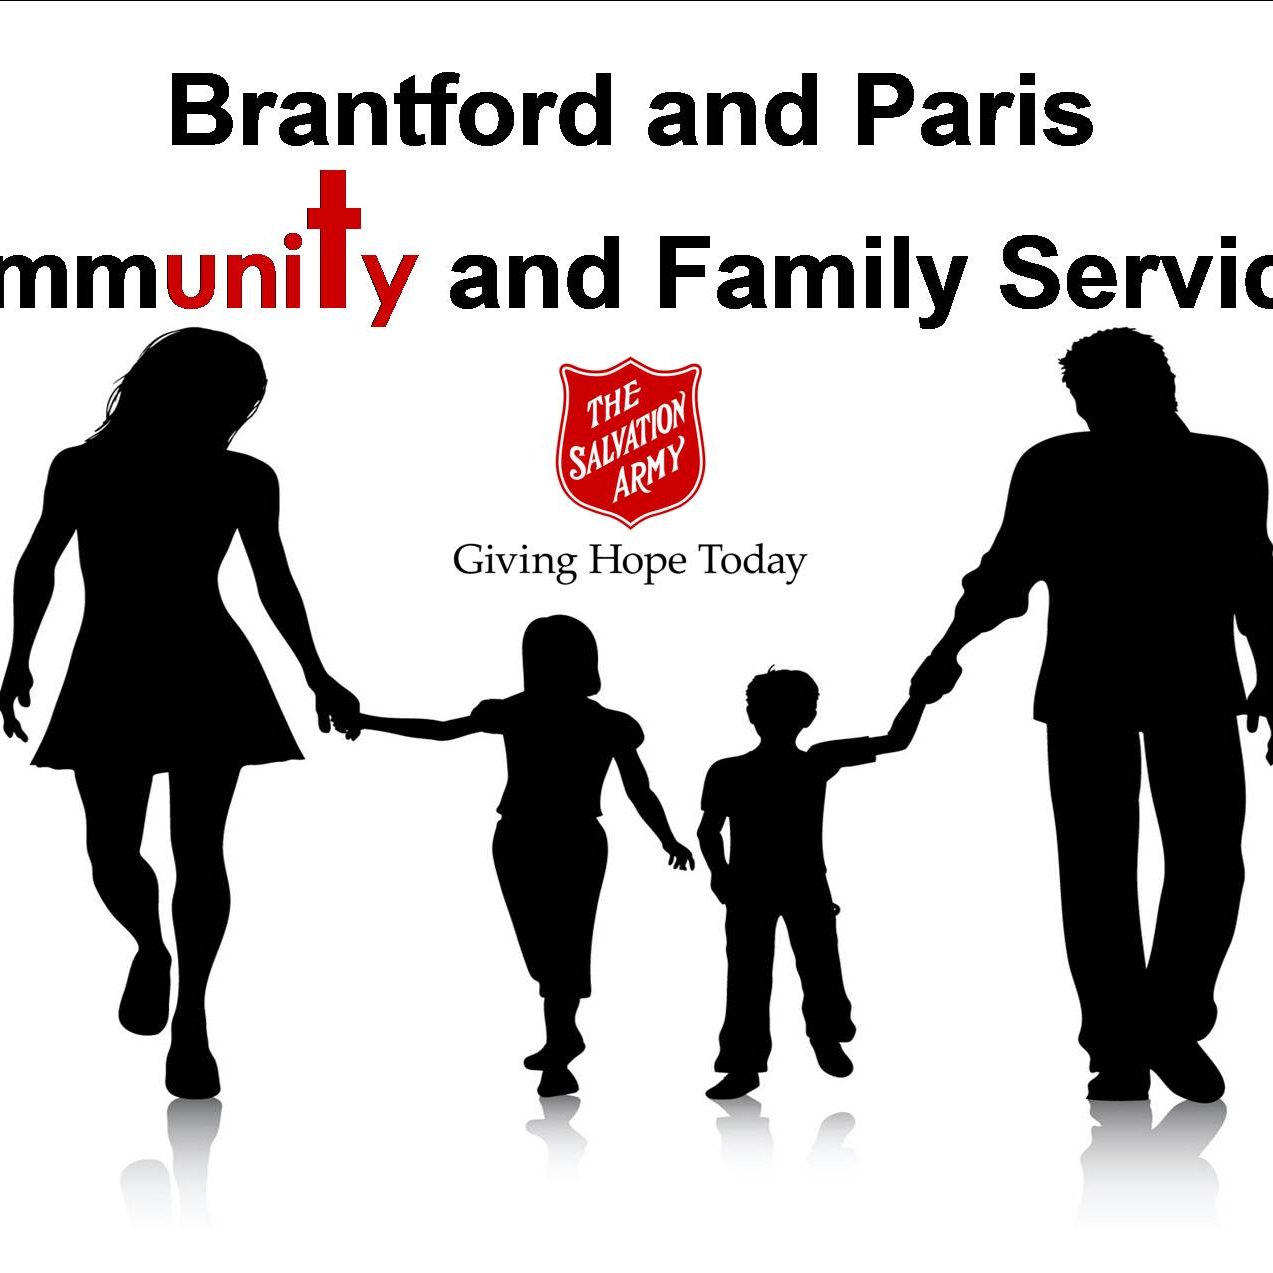 Offering emergency and on-going community programs to those in need in Paris and Brantford, ON